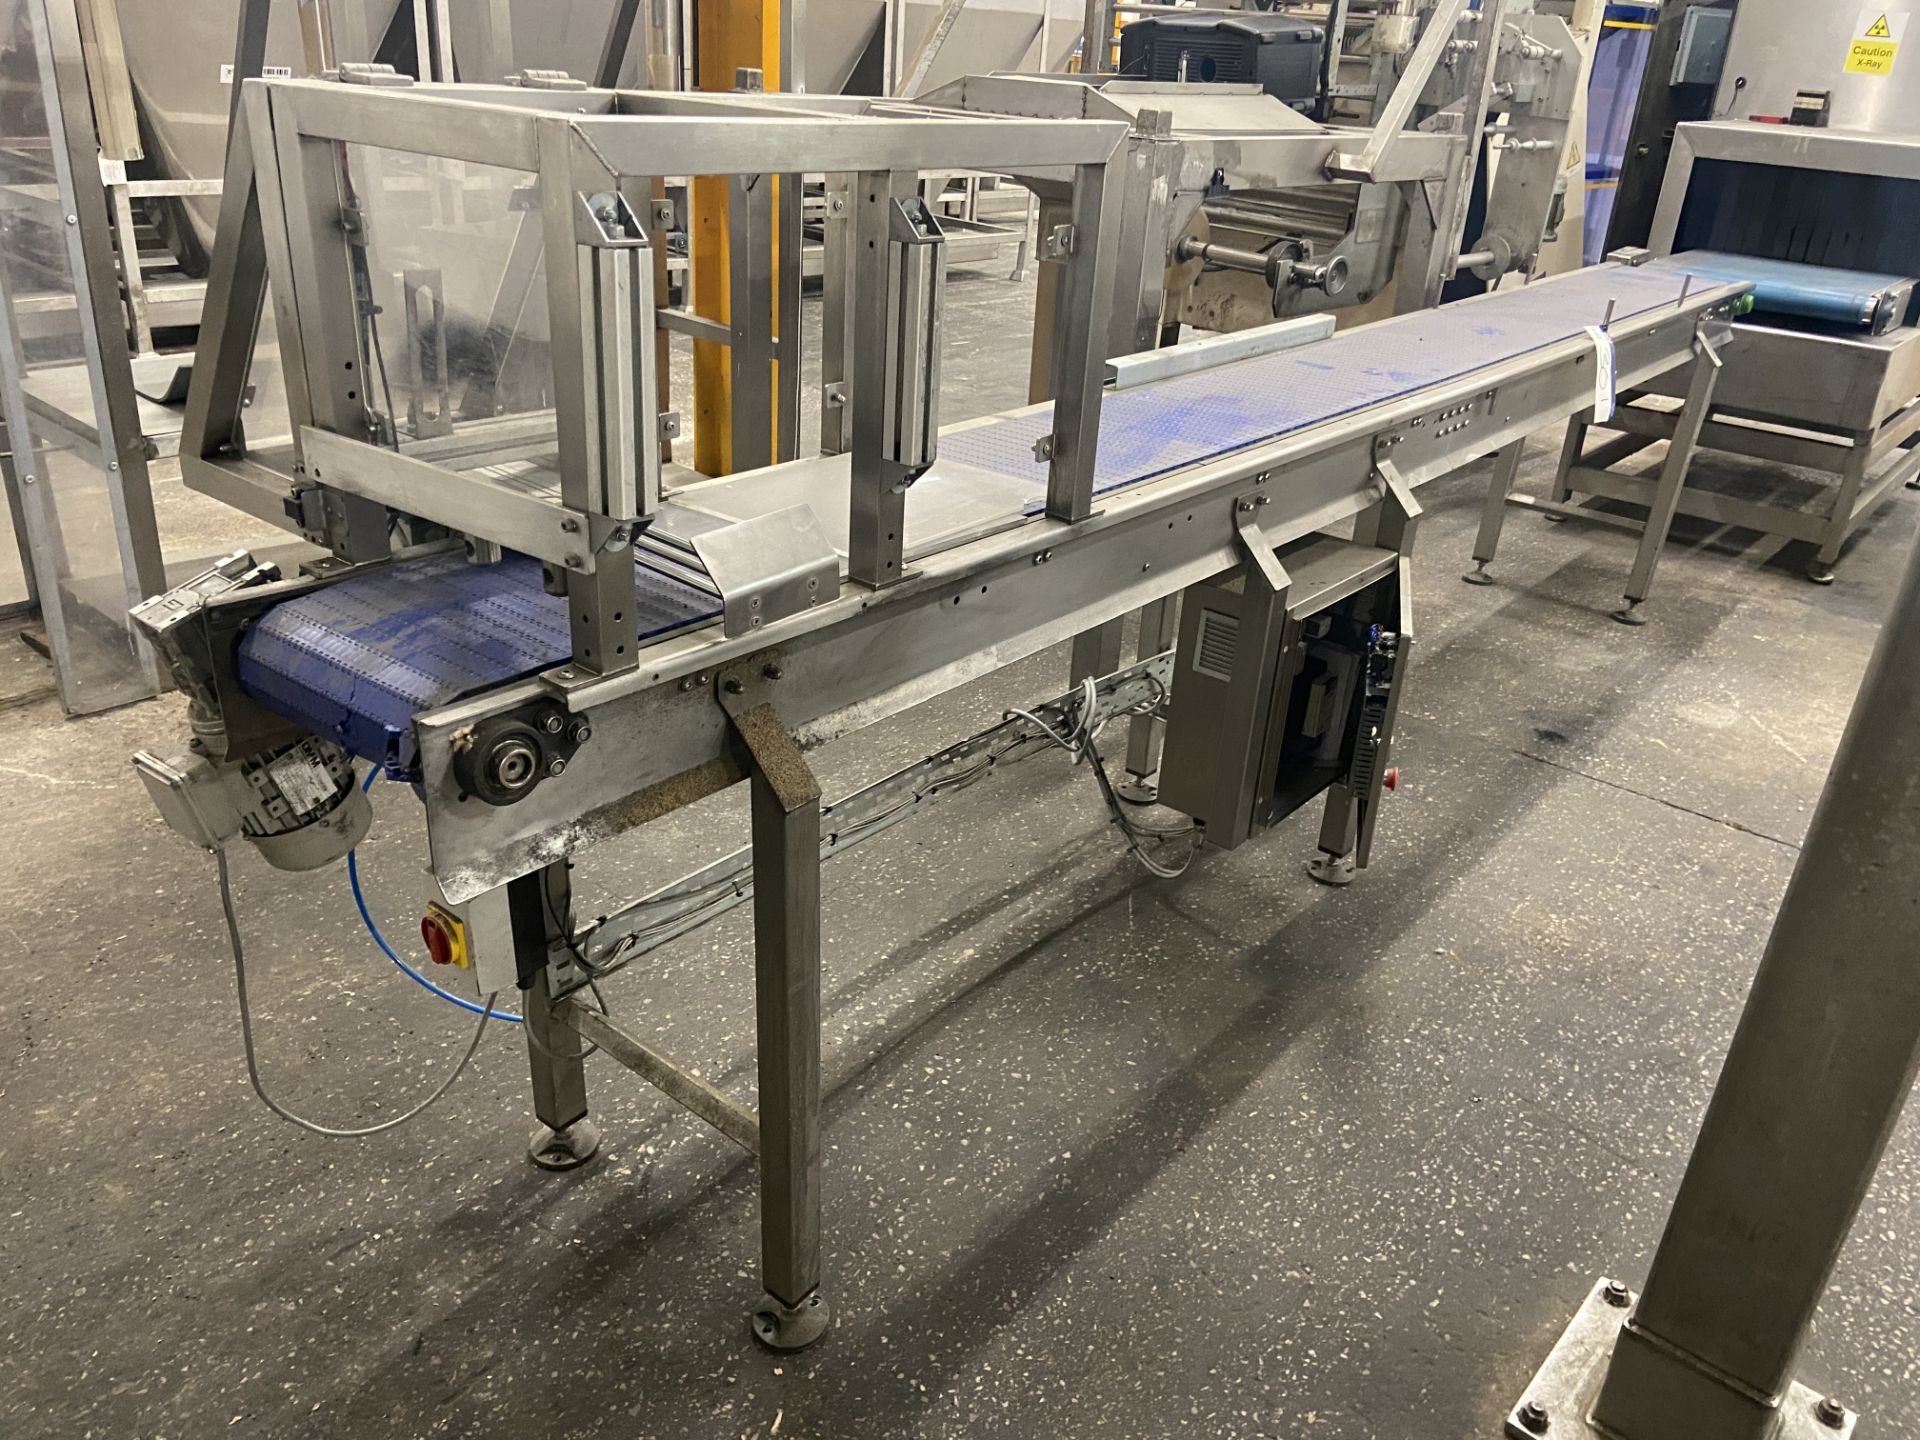 Stainless Steel Framed Plastic Belt Conveyor, approx. 4.2m centres long x 300mm wide on belt, with